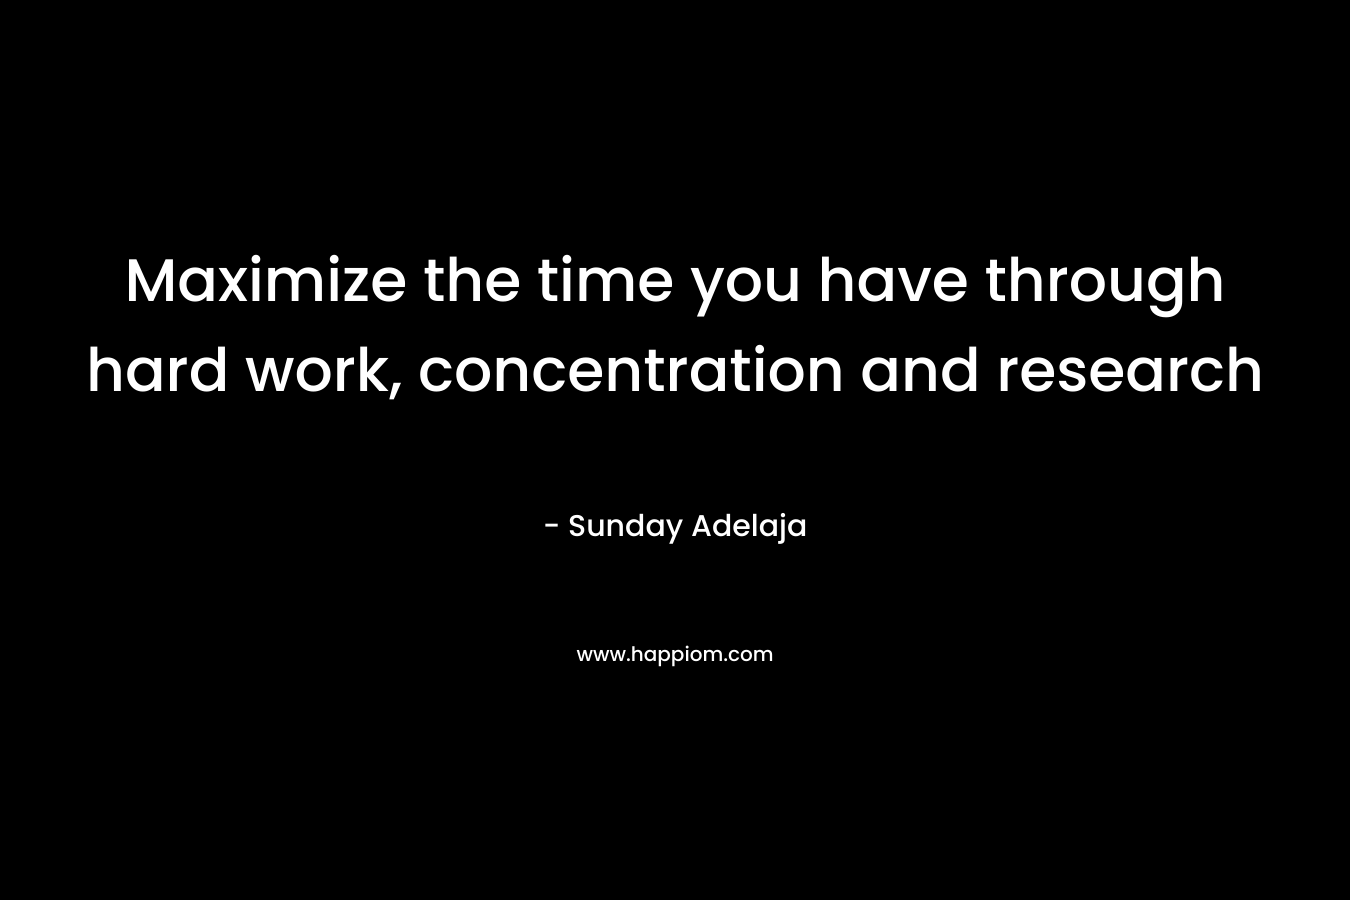 Maximize the time you have through hard work, concentration and research